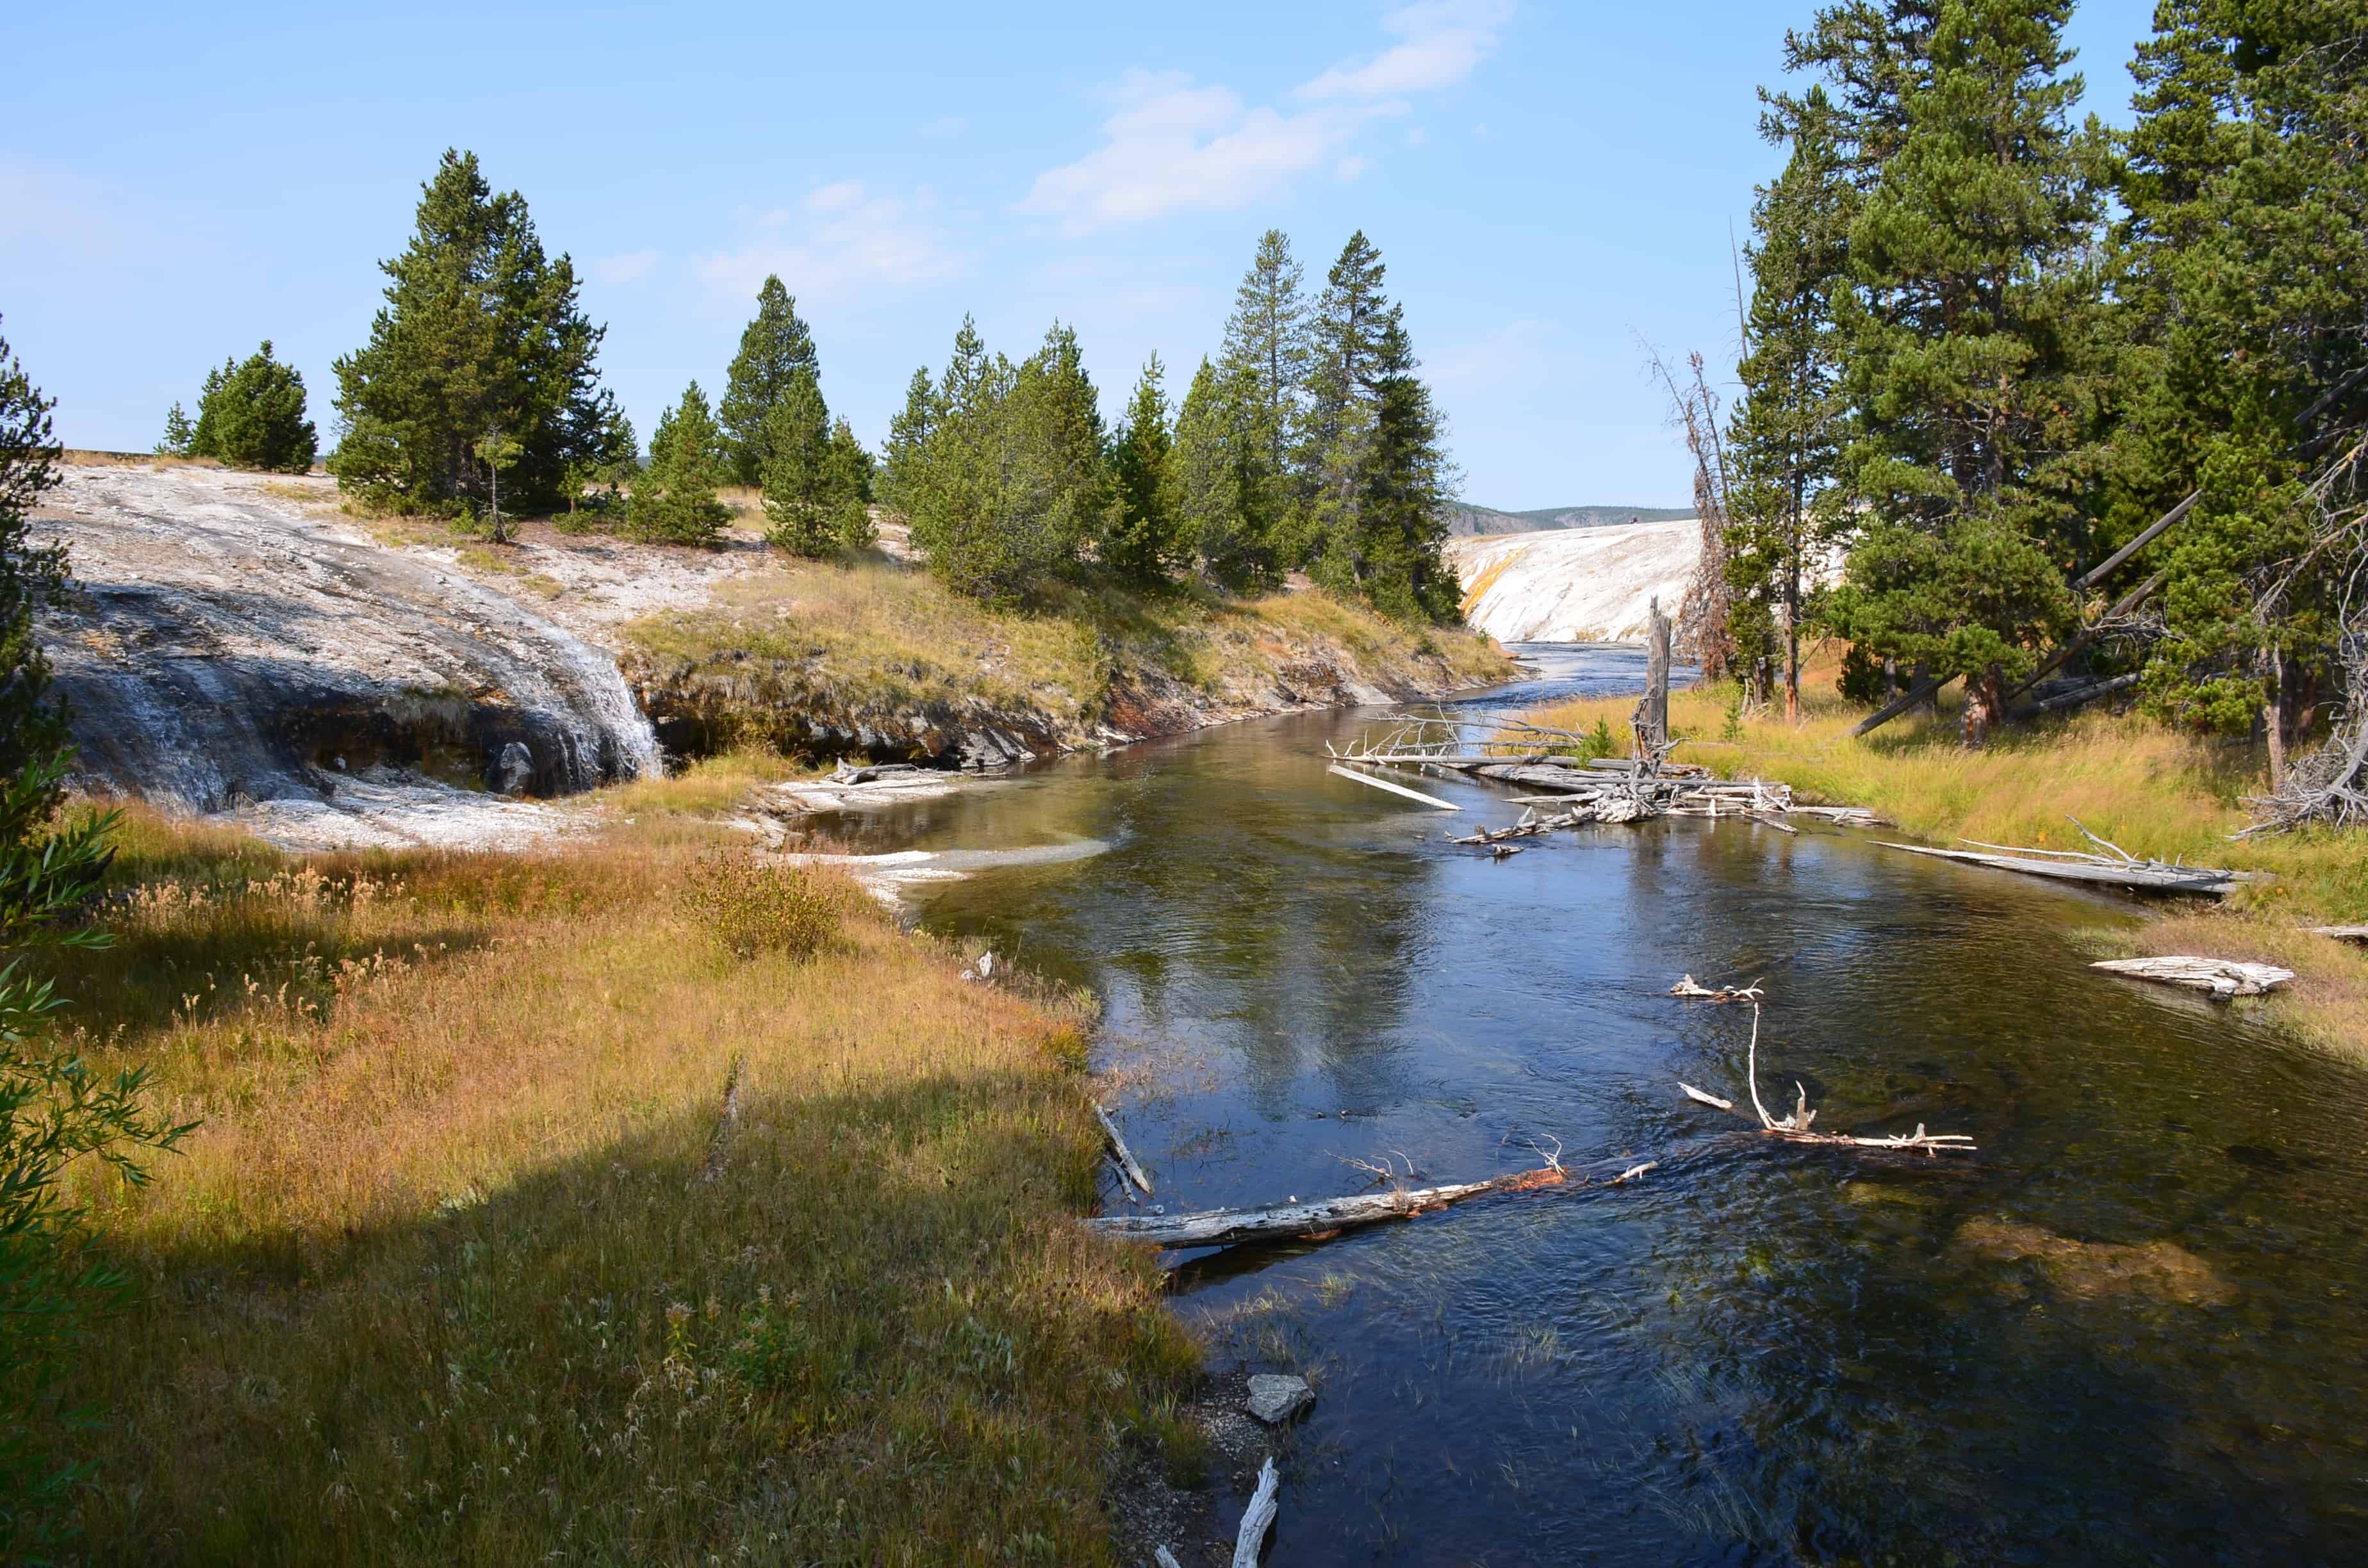 Firehole River at the Upper Geyser Basin in Yellowstone National Park, Wyoming